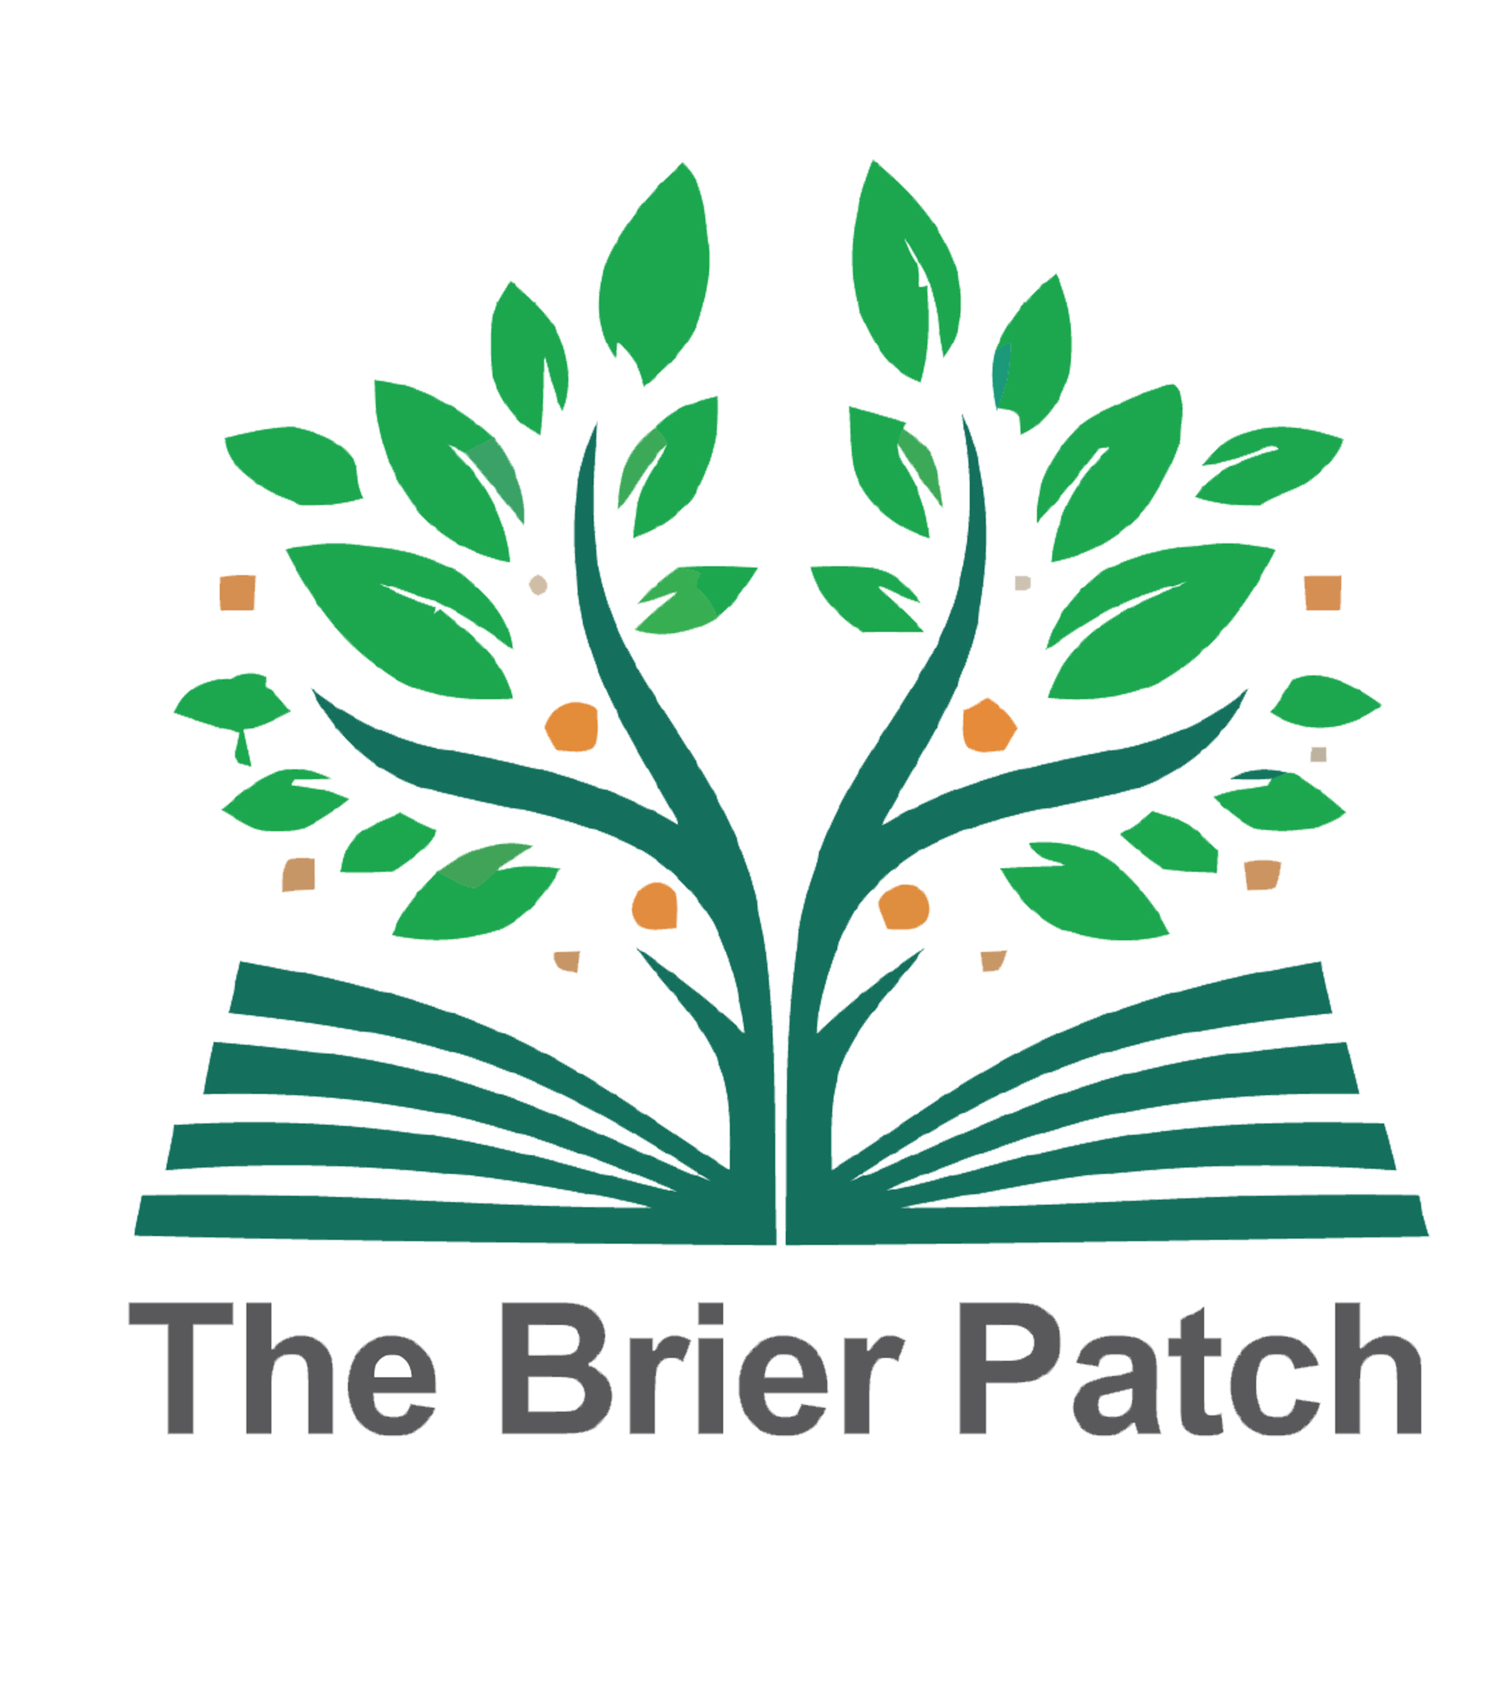 The Brier Patch